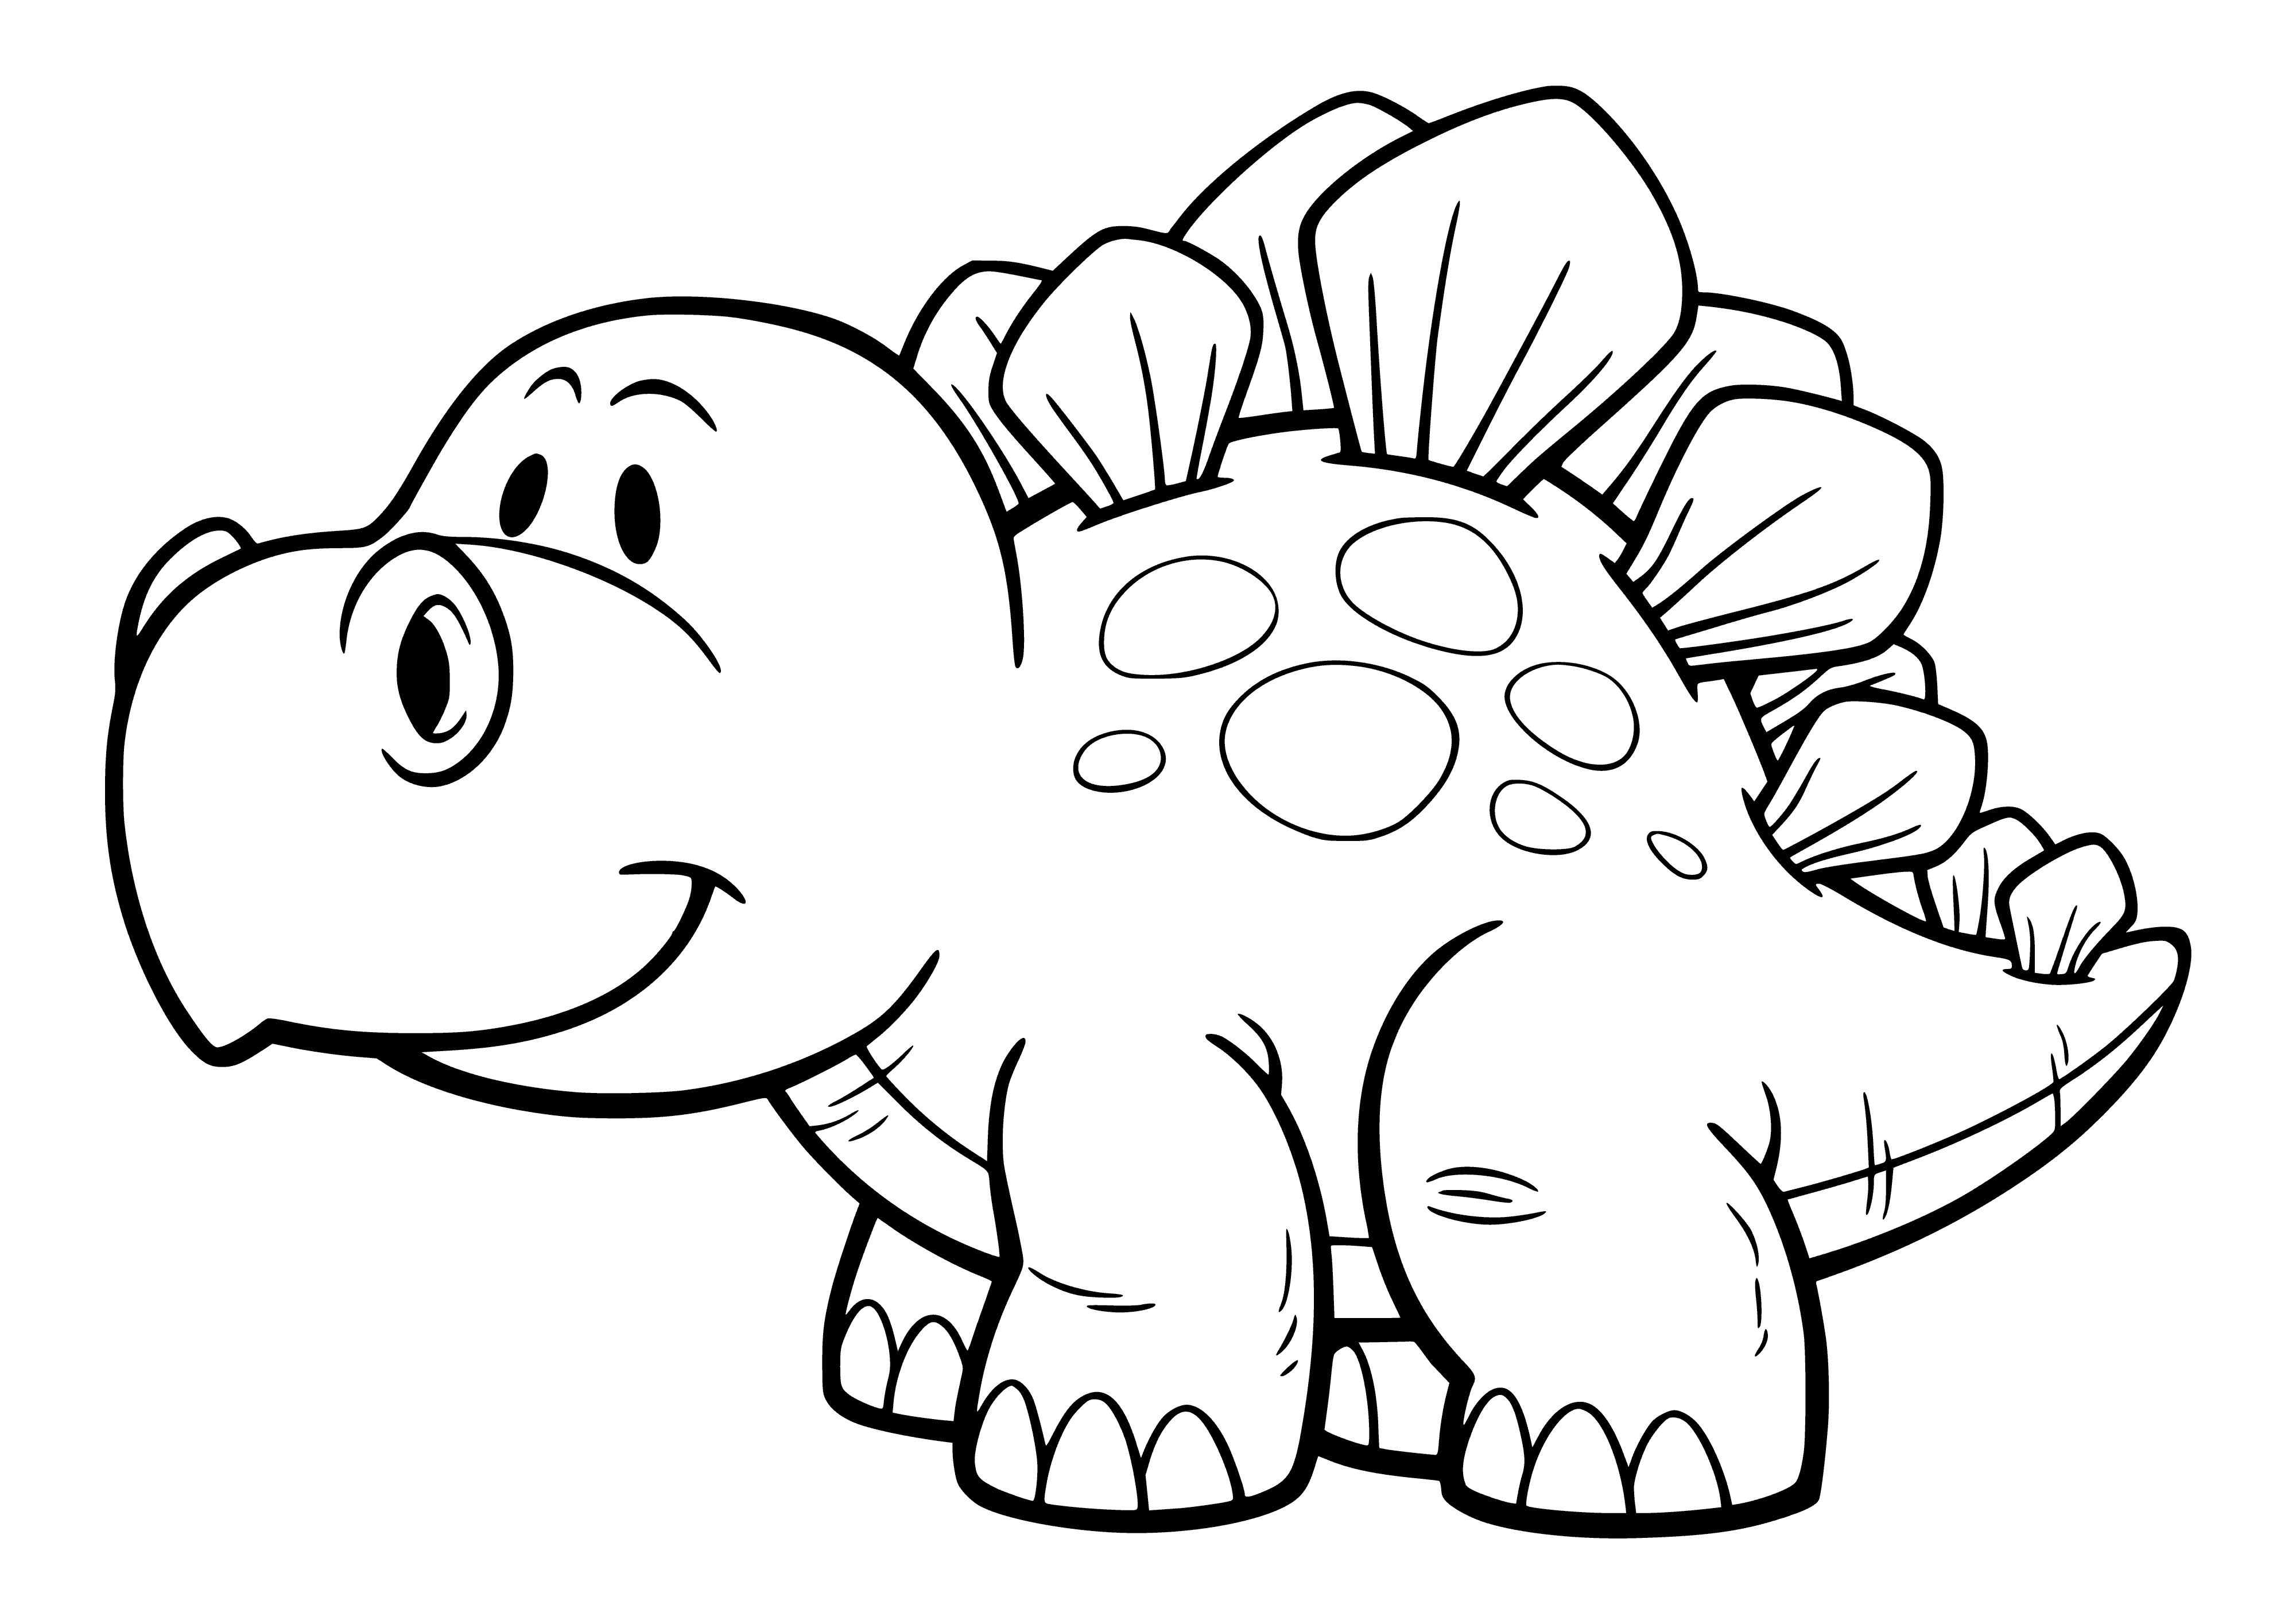 coloring page: A baby stegosaurus crawls on the ground, has a long curved neck, small head, body of bumps, & a long thin tail.